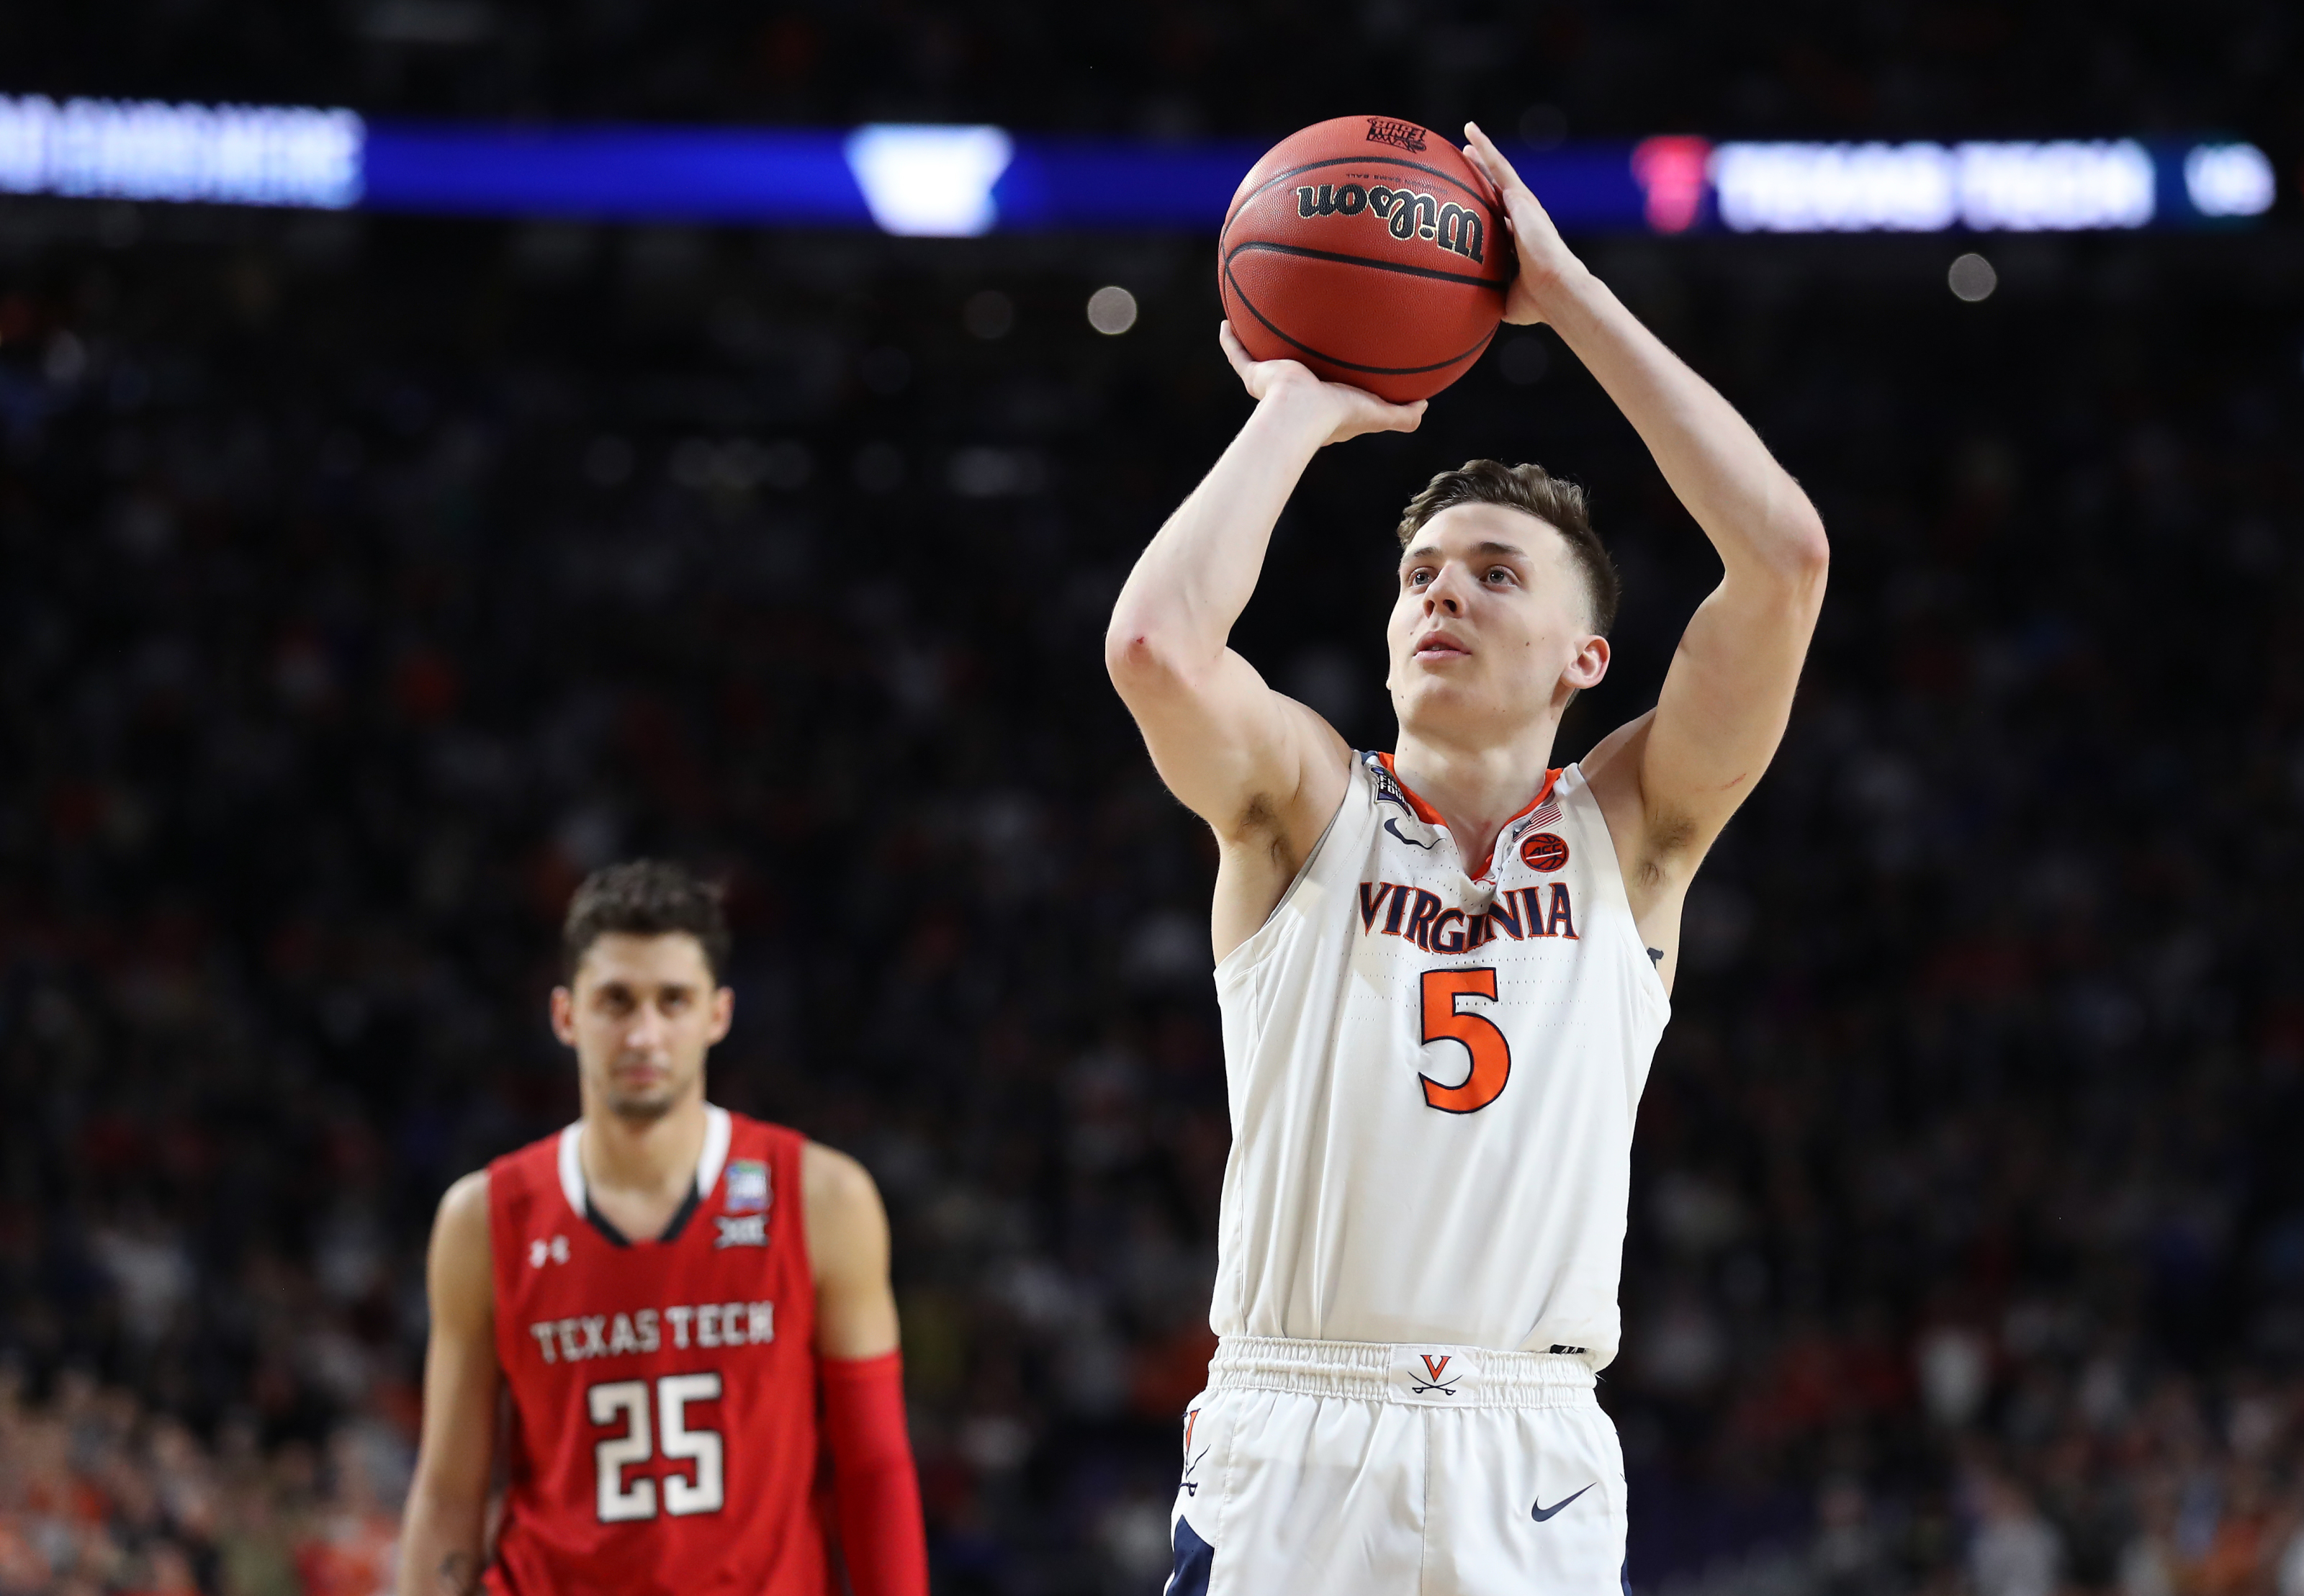 Already a national champion, Kyle Guy is ready if Kings call his